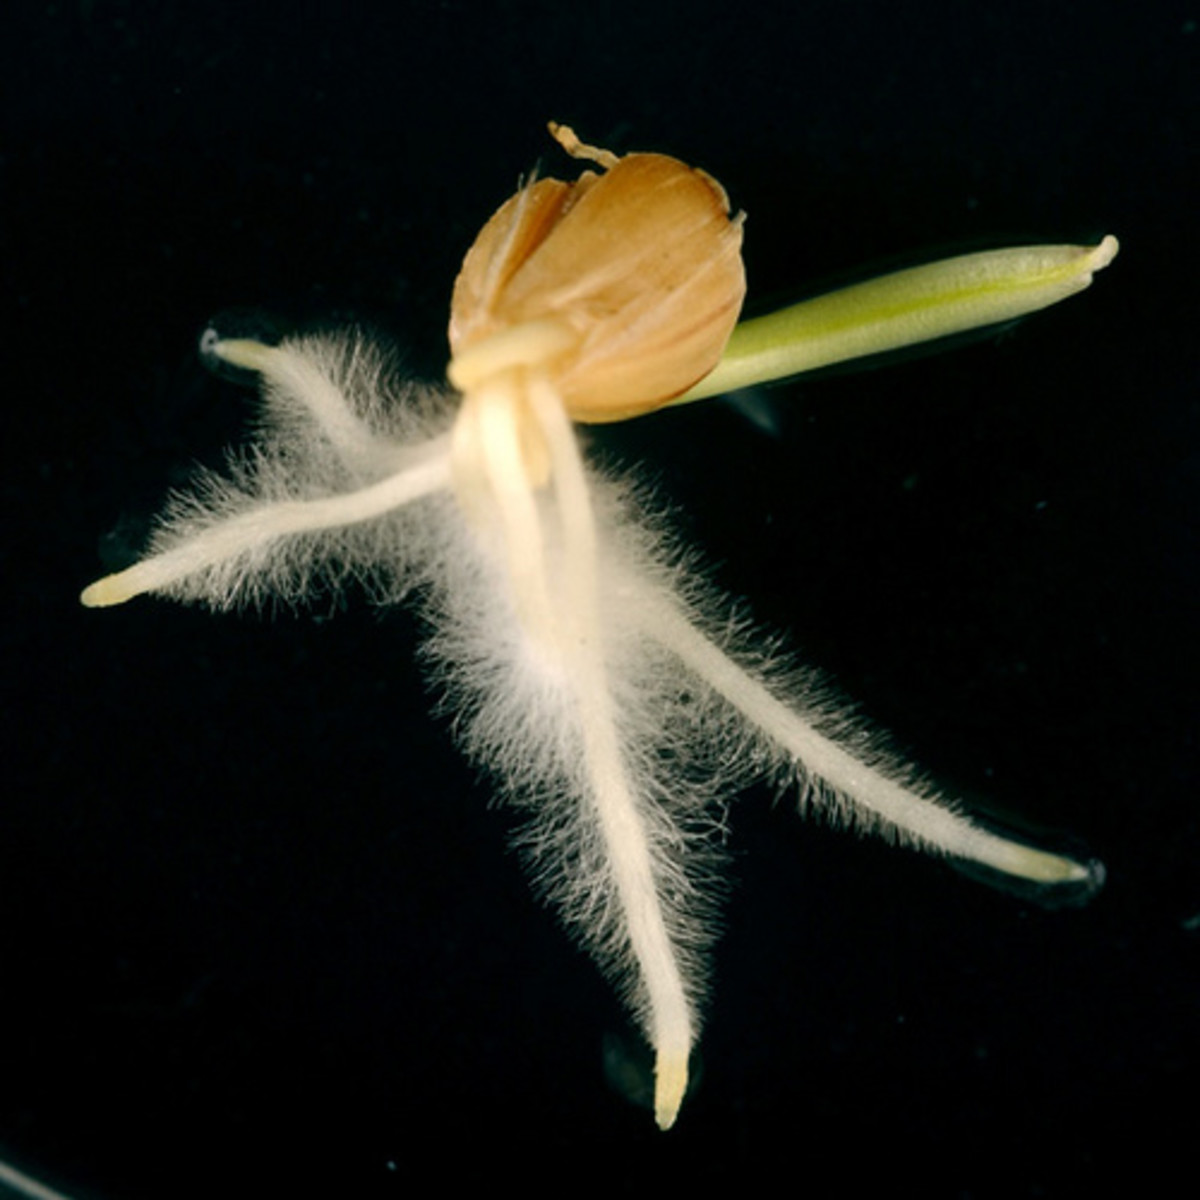 Detail of the radicle of a barley seed after germination and as it transforms into the primary root.